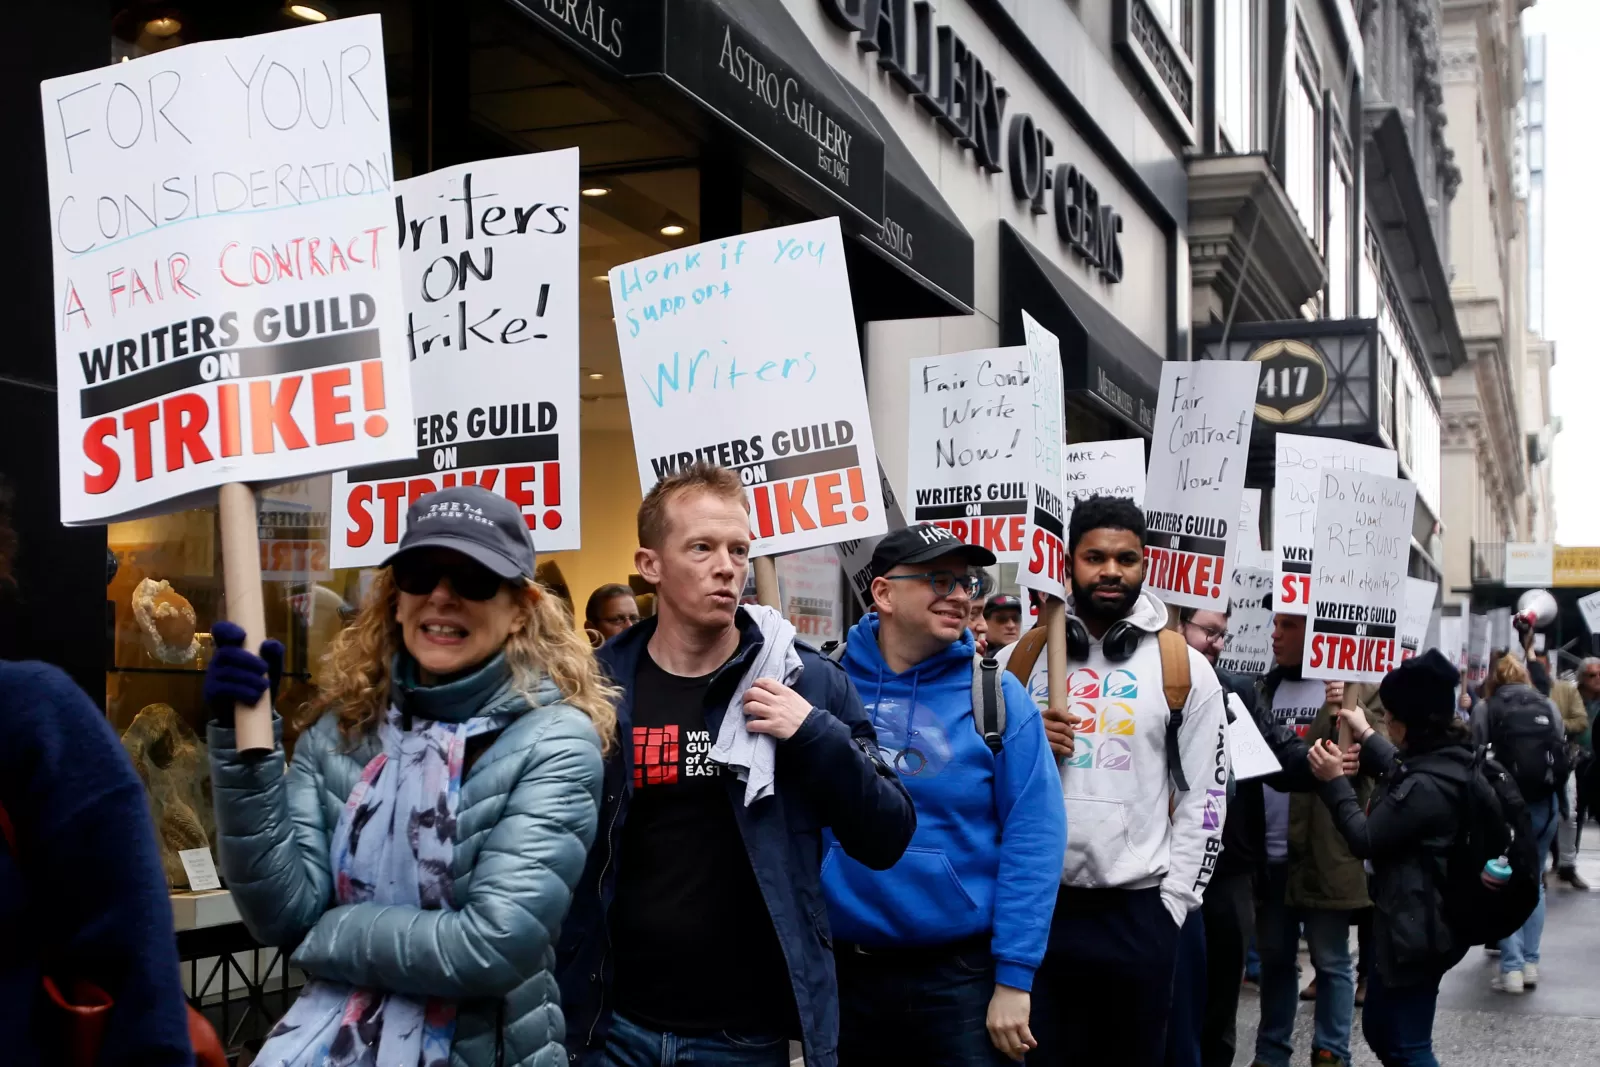 Why Are Hollywood Writers Going On Strike? Comprehensive Reasons